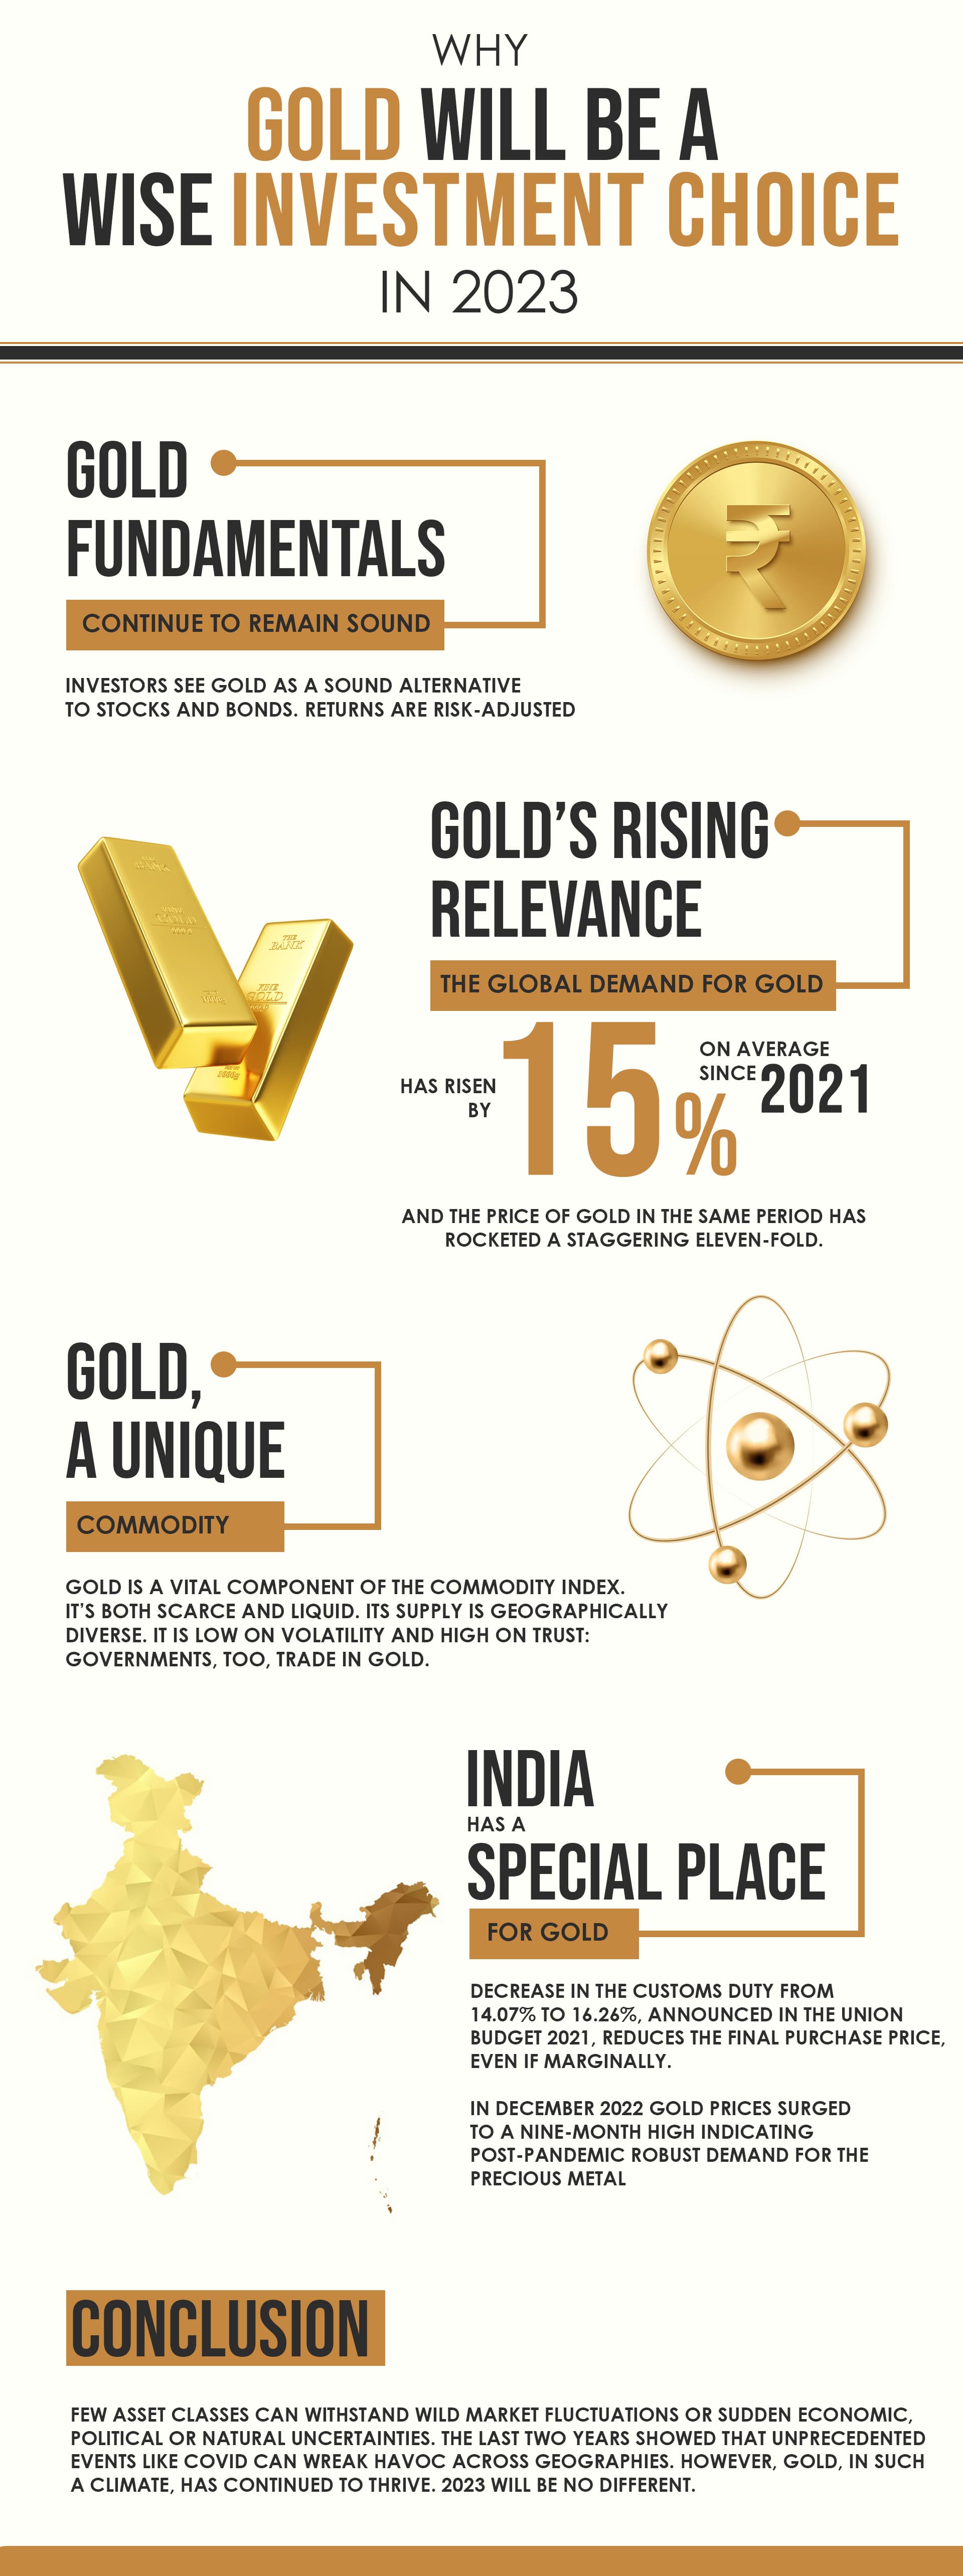 Infographic # 6 Why Gold will be a wise investment choice in 2022